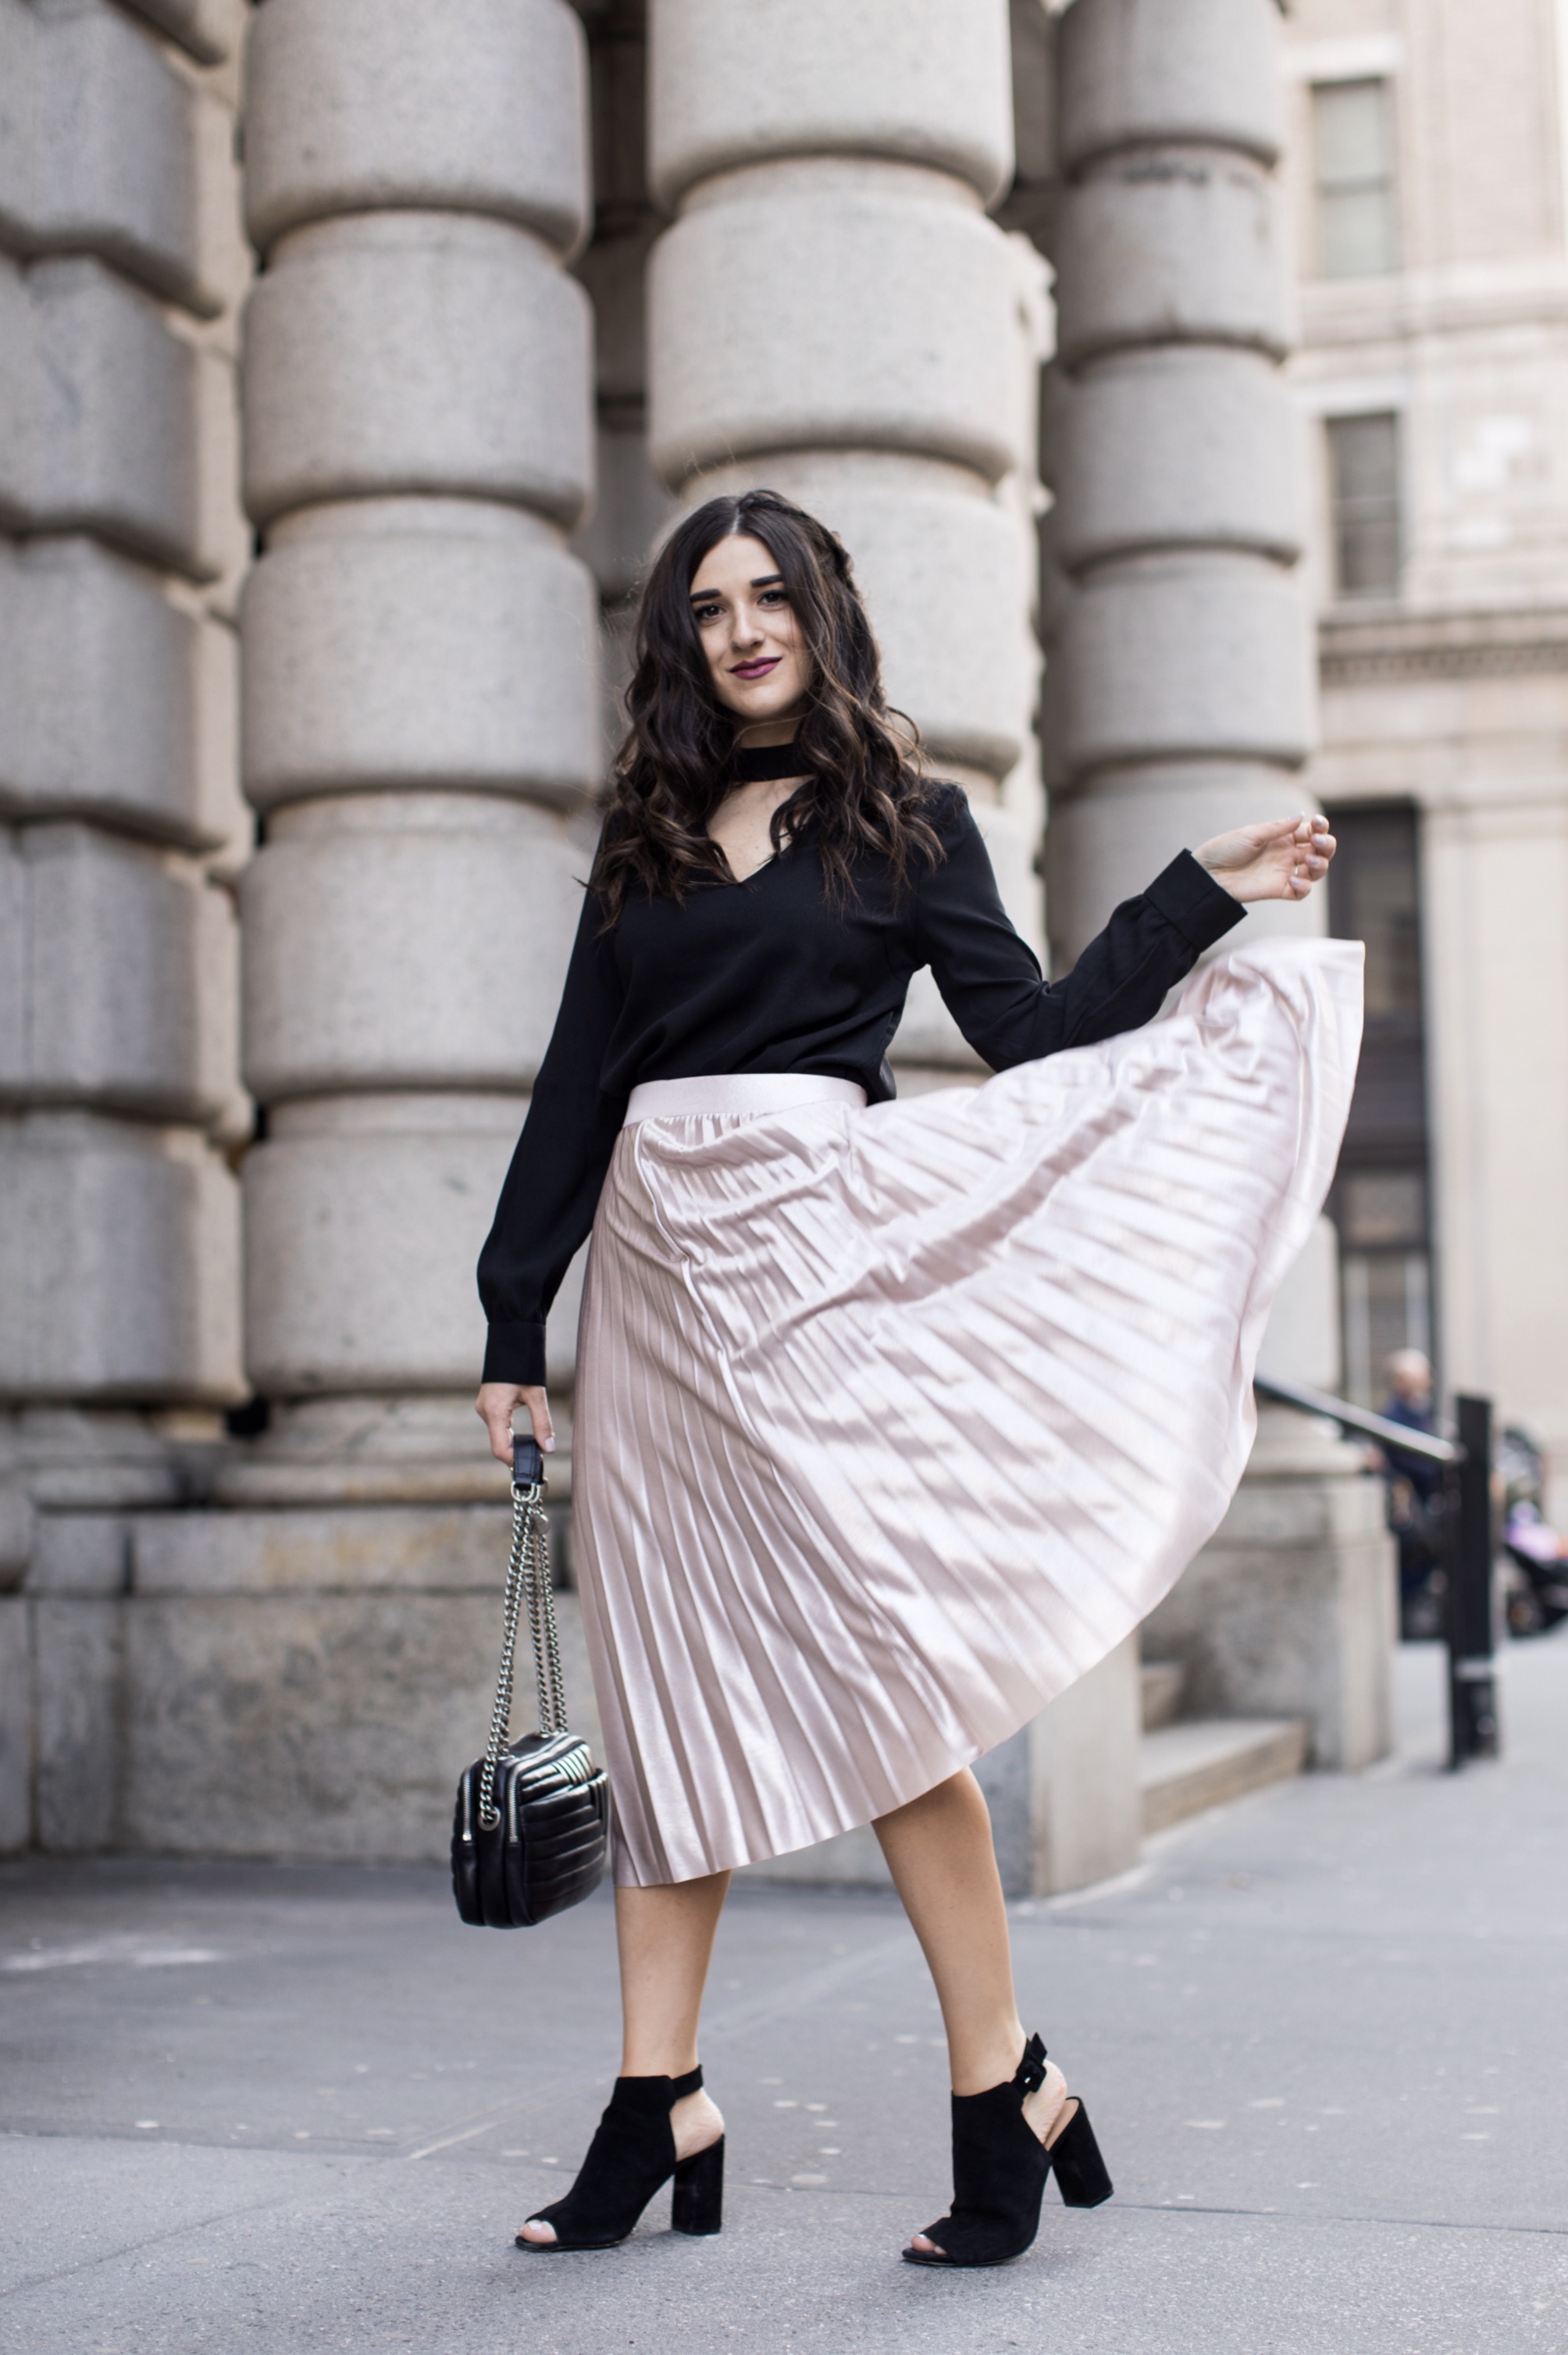 Metallic Midi Skirt Black Cutout Top How I Pack In A Carry On Esther Santer Fashion Blog NYC Street Style Blogger Outfit OOTD Trendy Feminine Girly Spring Hairstyle Waves Travel Tips Honeymoon Photshoot Pose Wearing  Shop Peep Toe Booties Henri Bendel.jpg